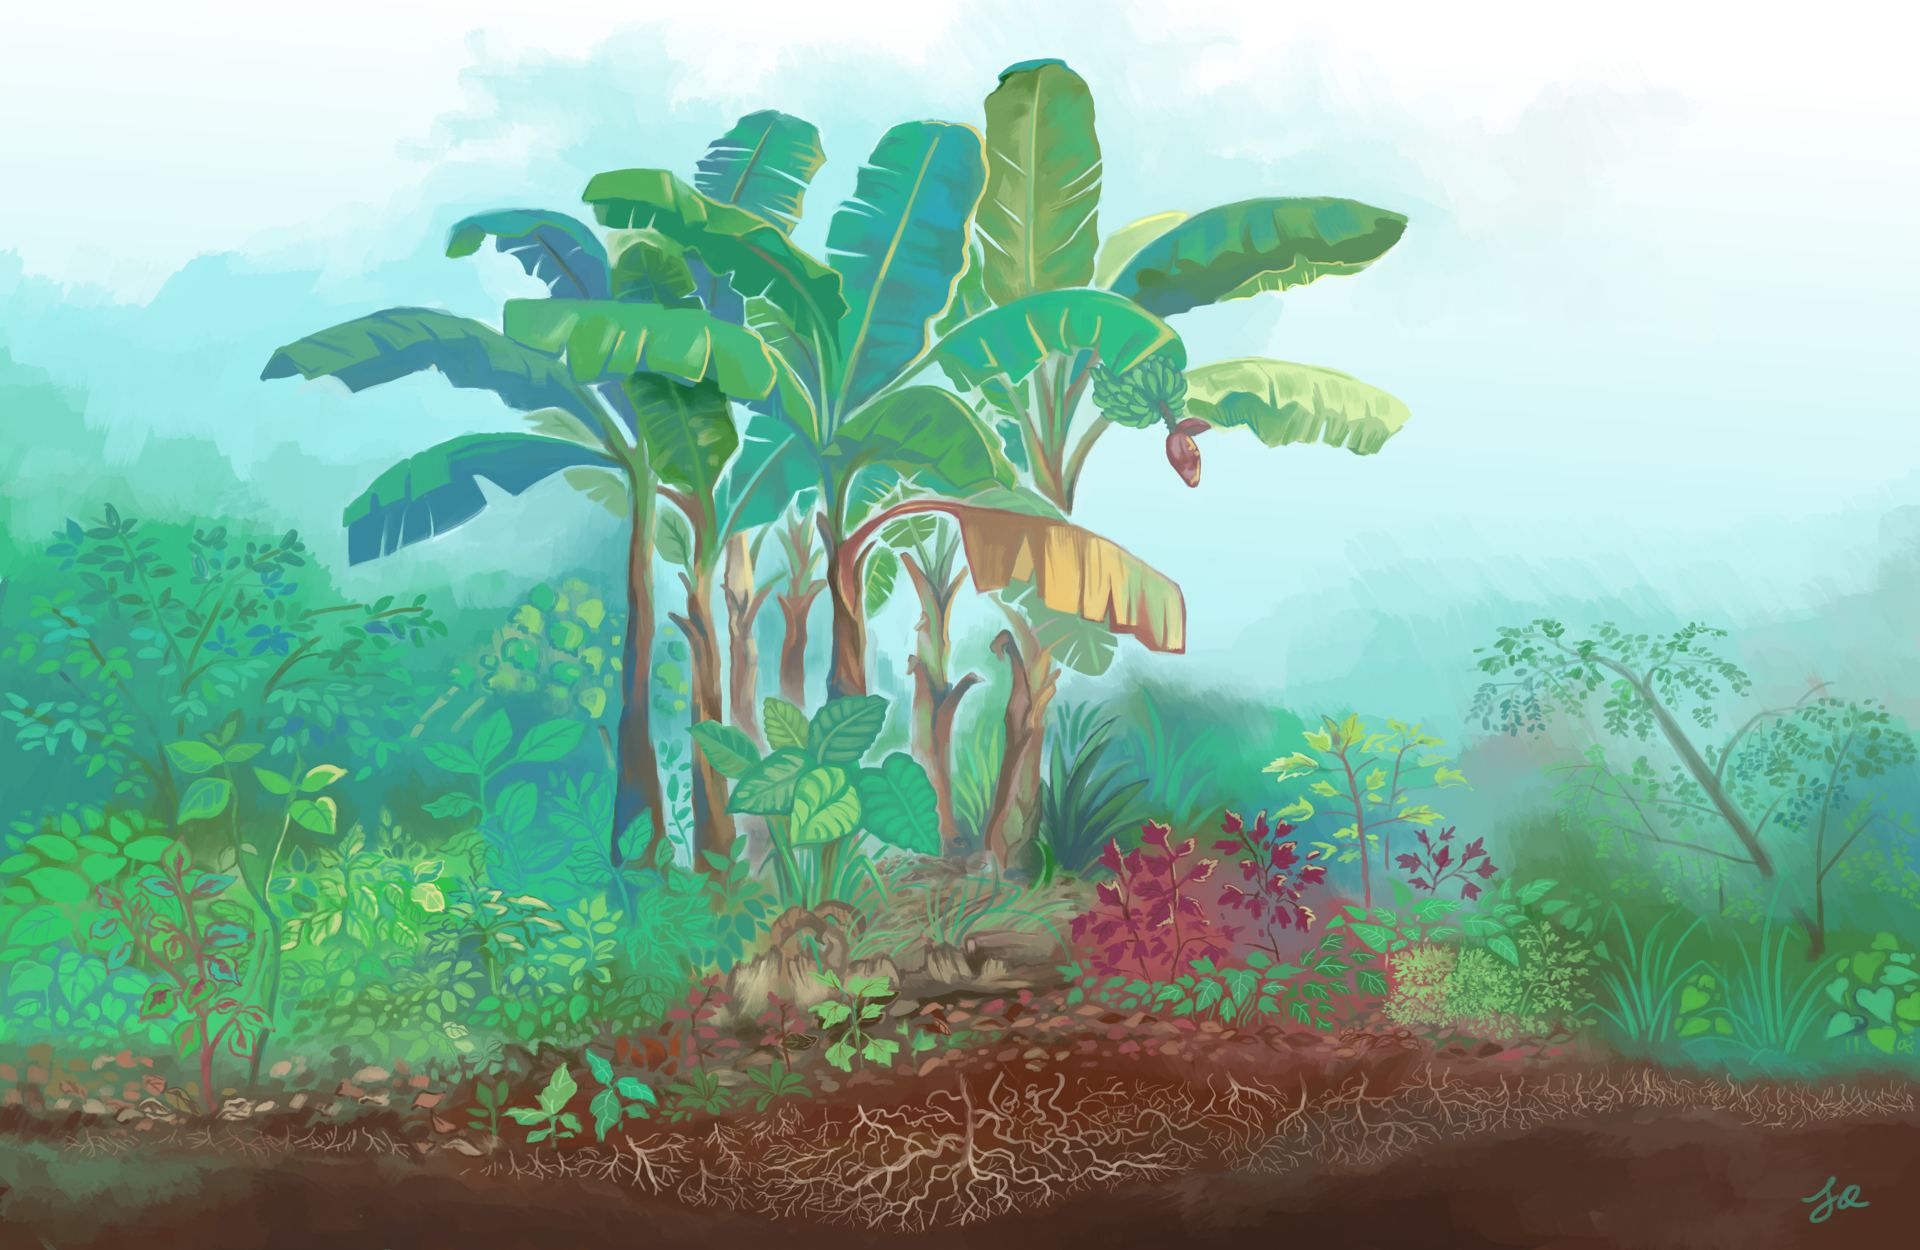 Digital painting of a banana circle in a garden featuring various plants like brinjal, cranberry hibiscus, pigeon pea, petai cina, yam, okra, sweet potato leaves etc.